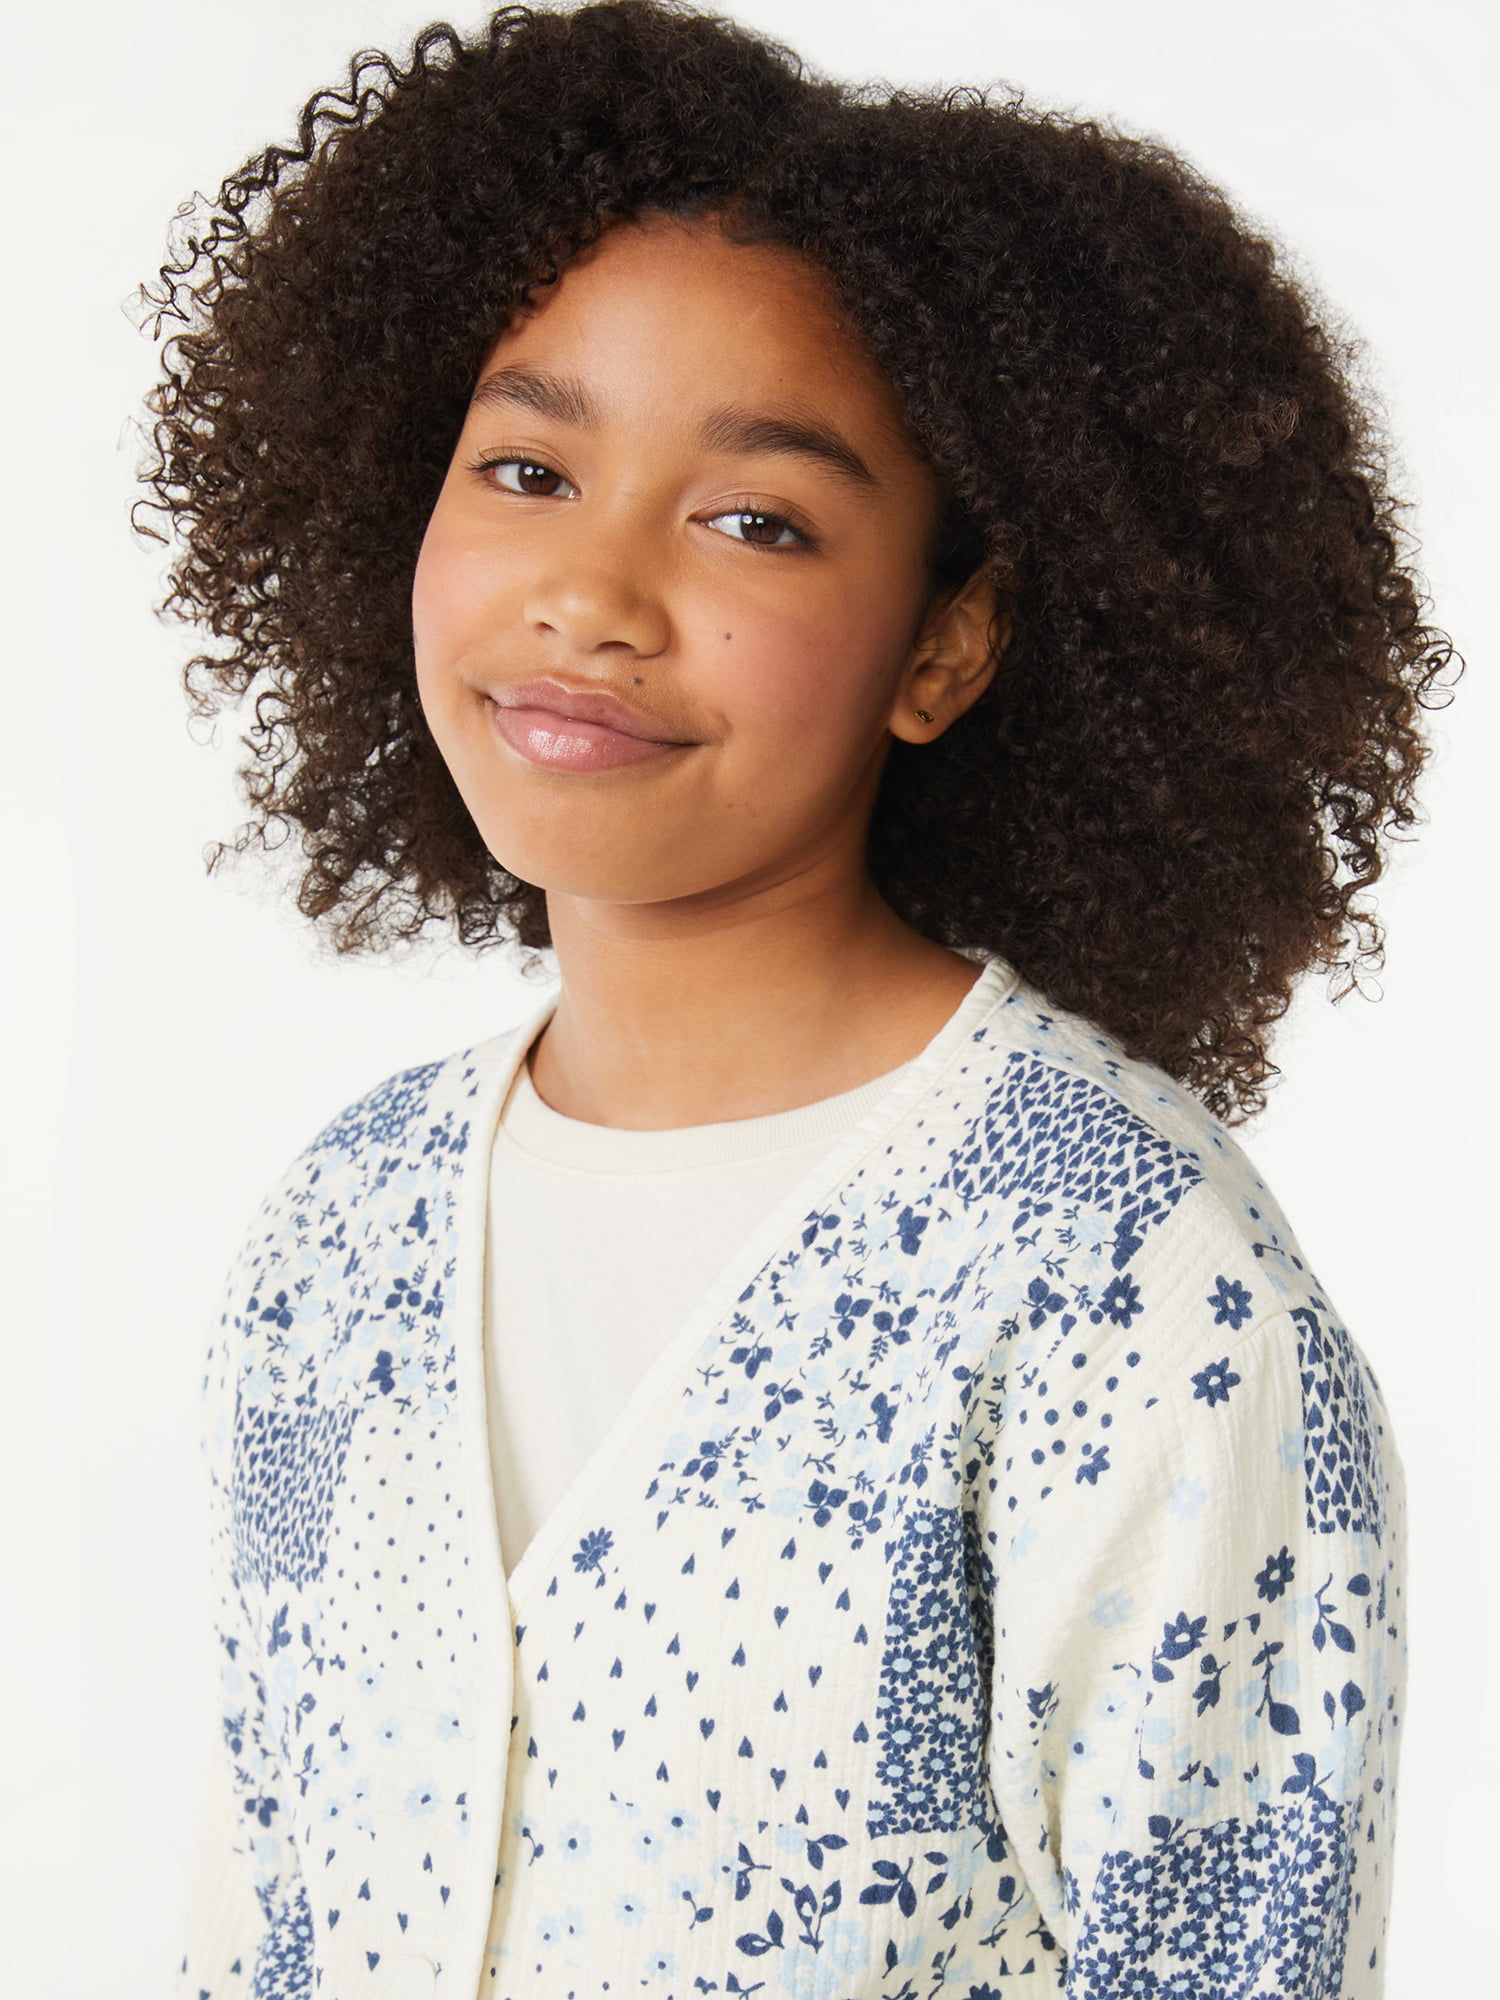 Print Assembly Free Quilted Woven Girls Sizes 4-18 Cardigan,